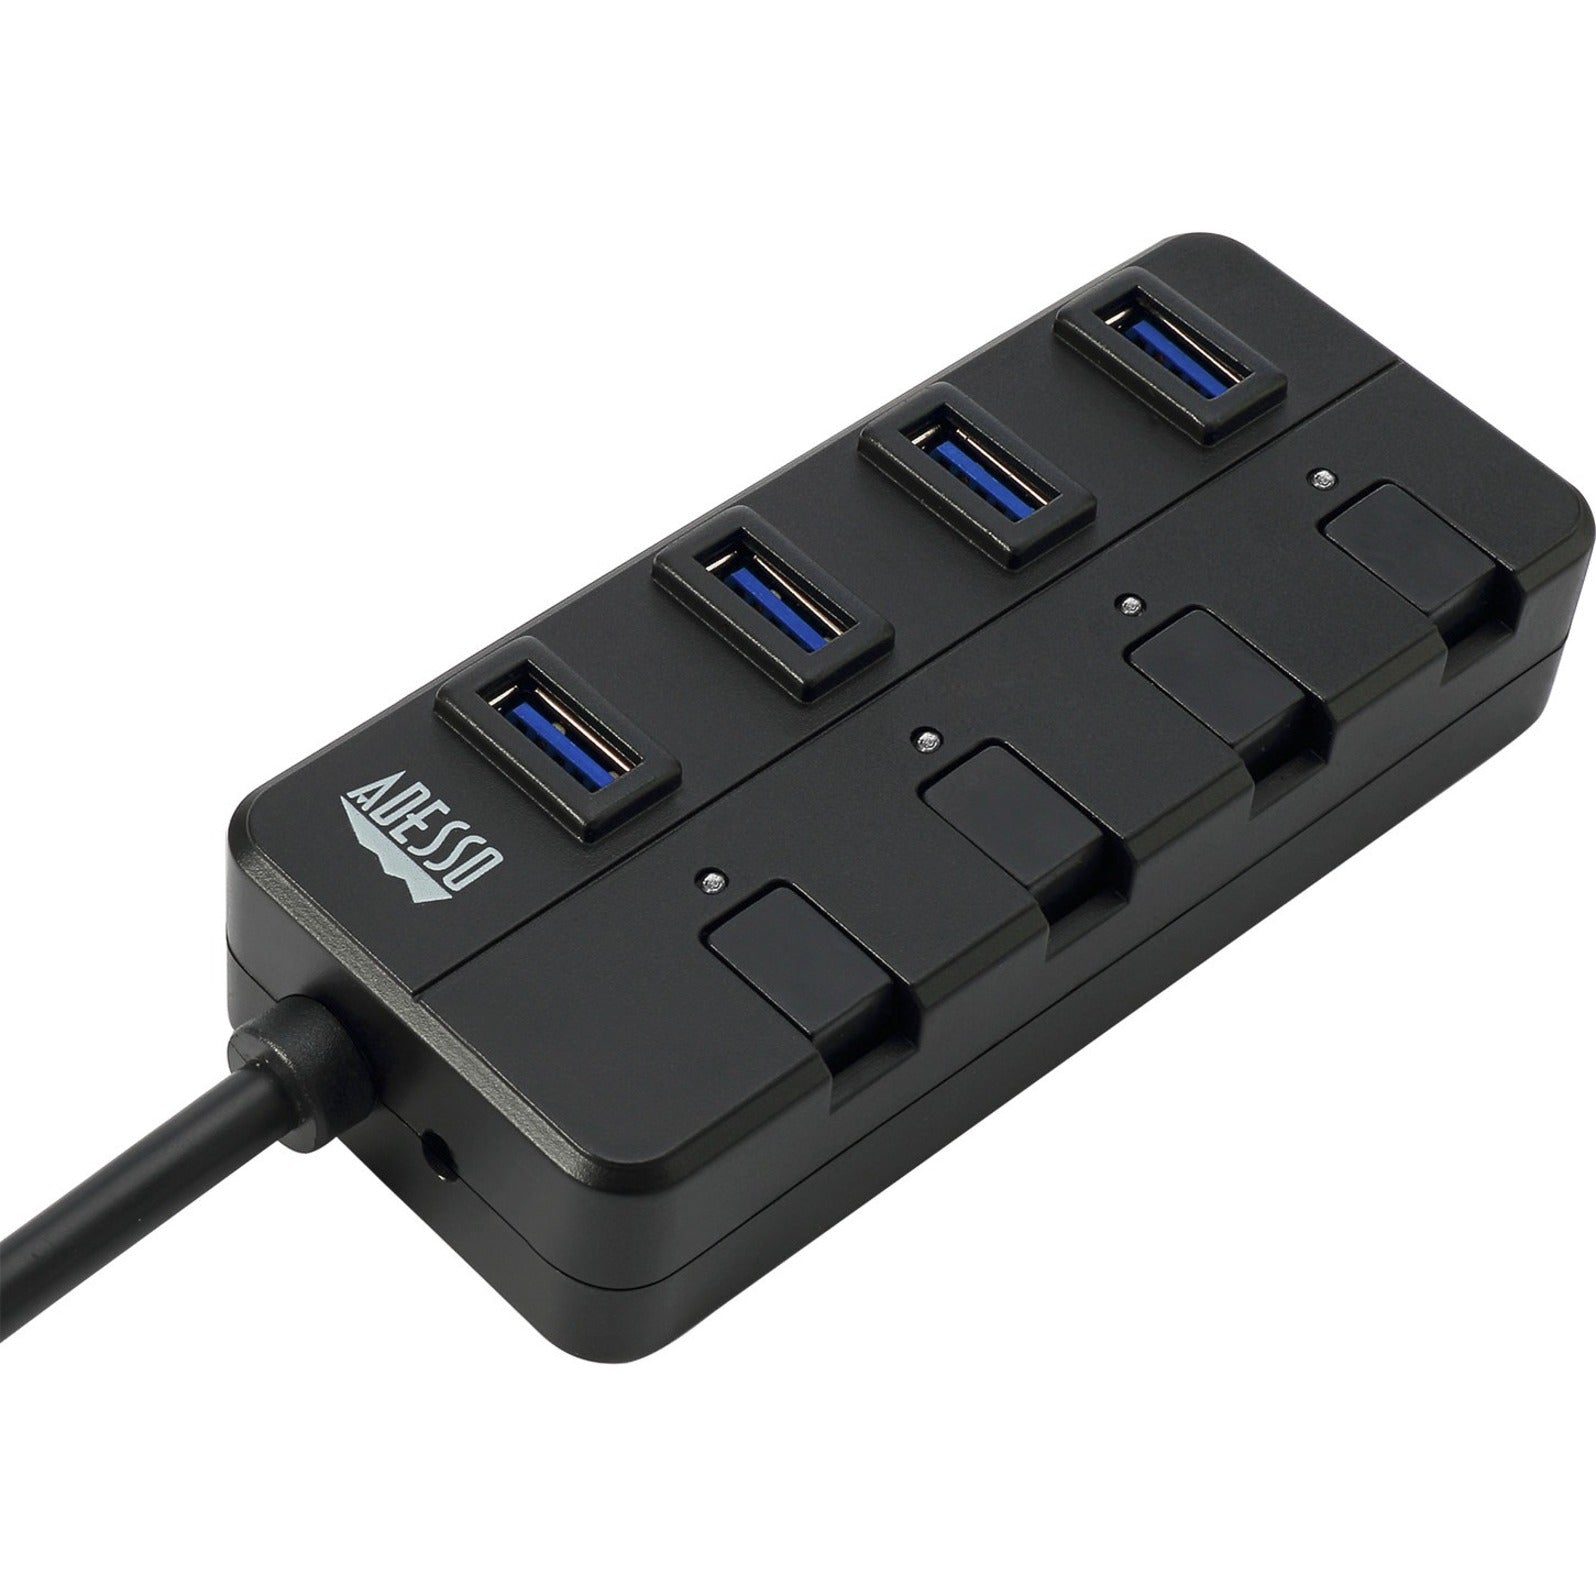 Adesso AUH-3040 4-ports USB 3.0 Hub, Expand Your USB Connectivity Effortlessly